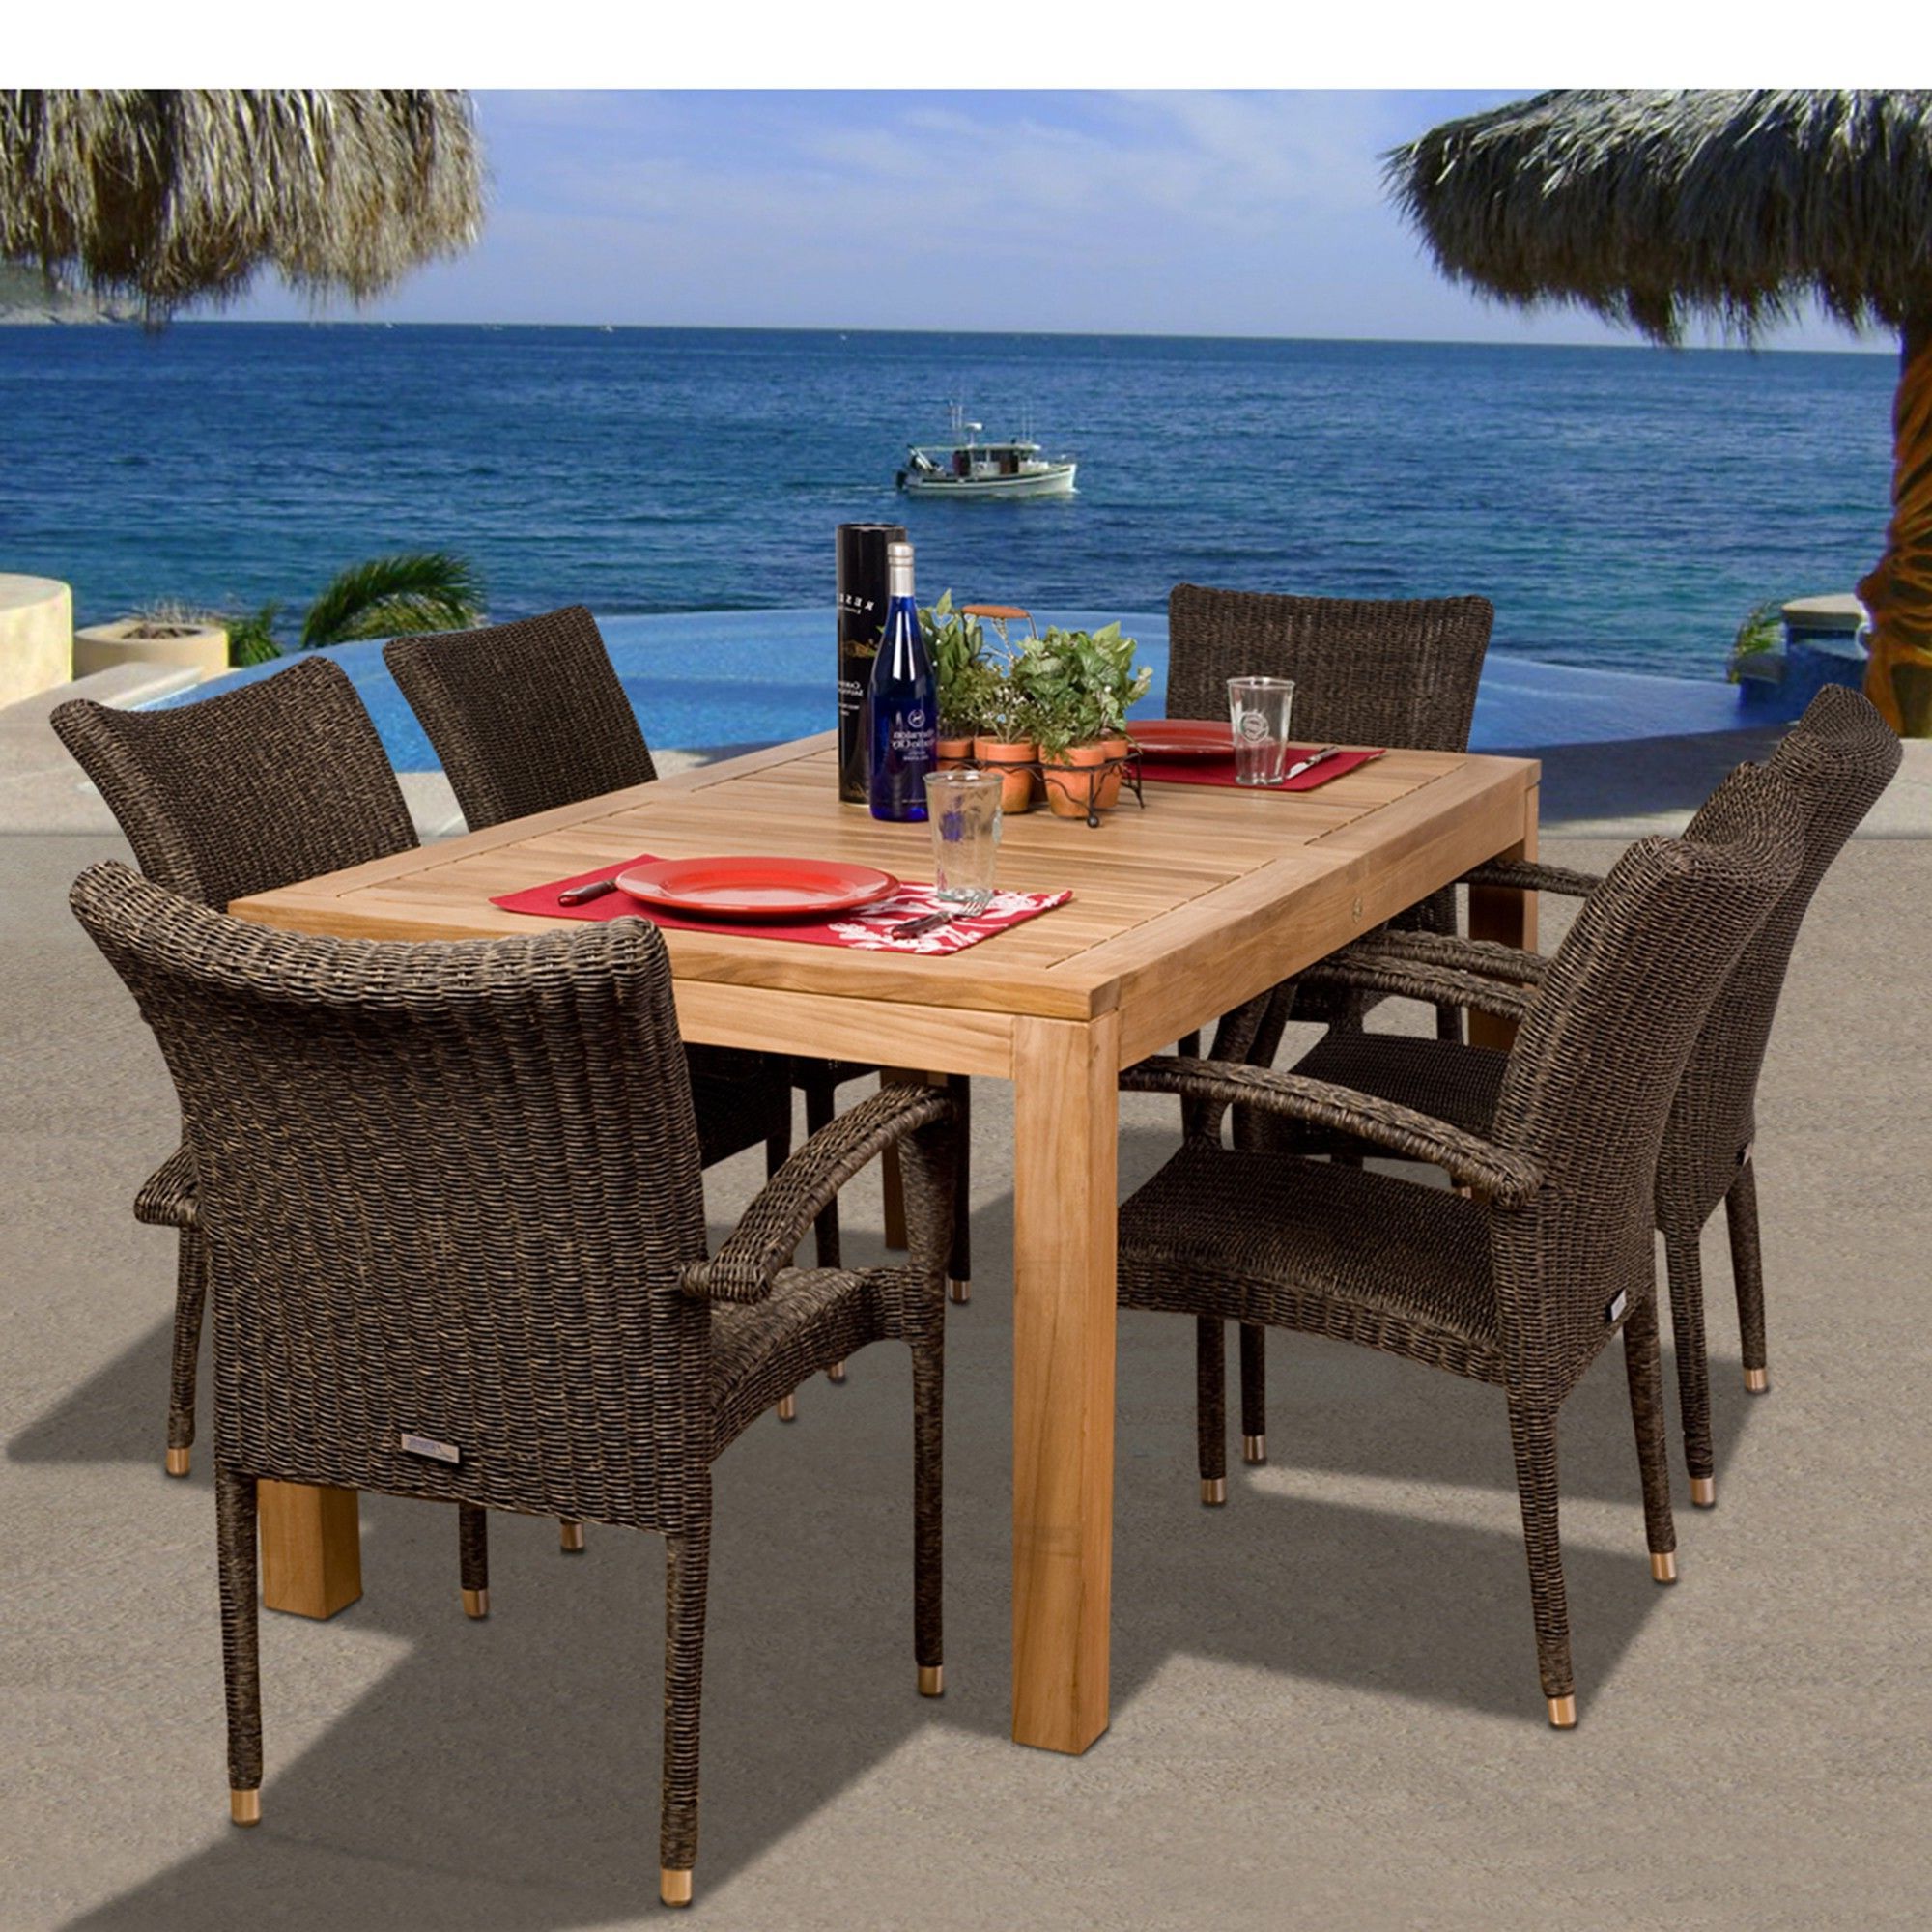 Brown Wicker Rectangular Patio Dining Sets For Well Known 7 Piece Brown Brussels Teak Rectangular Outdoor Patio Dining Set  (View 2 of 15)